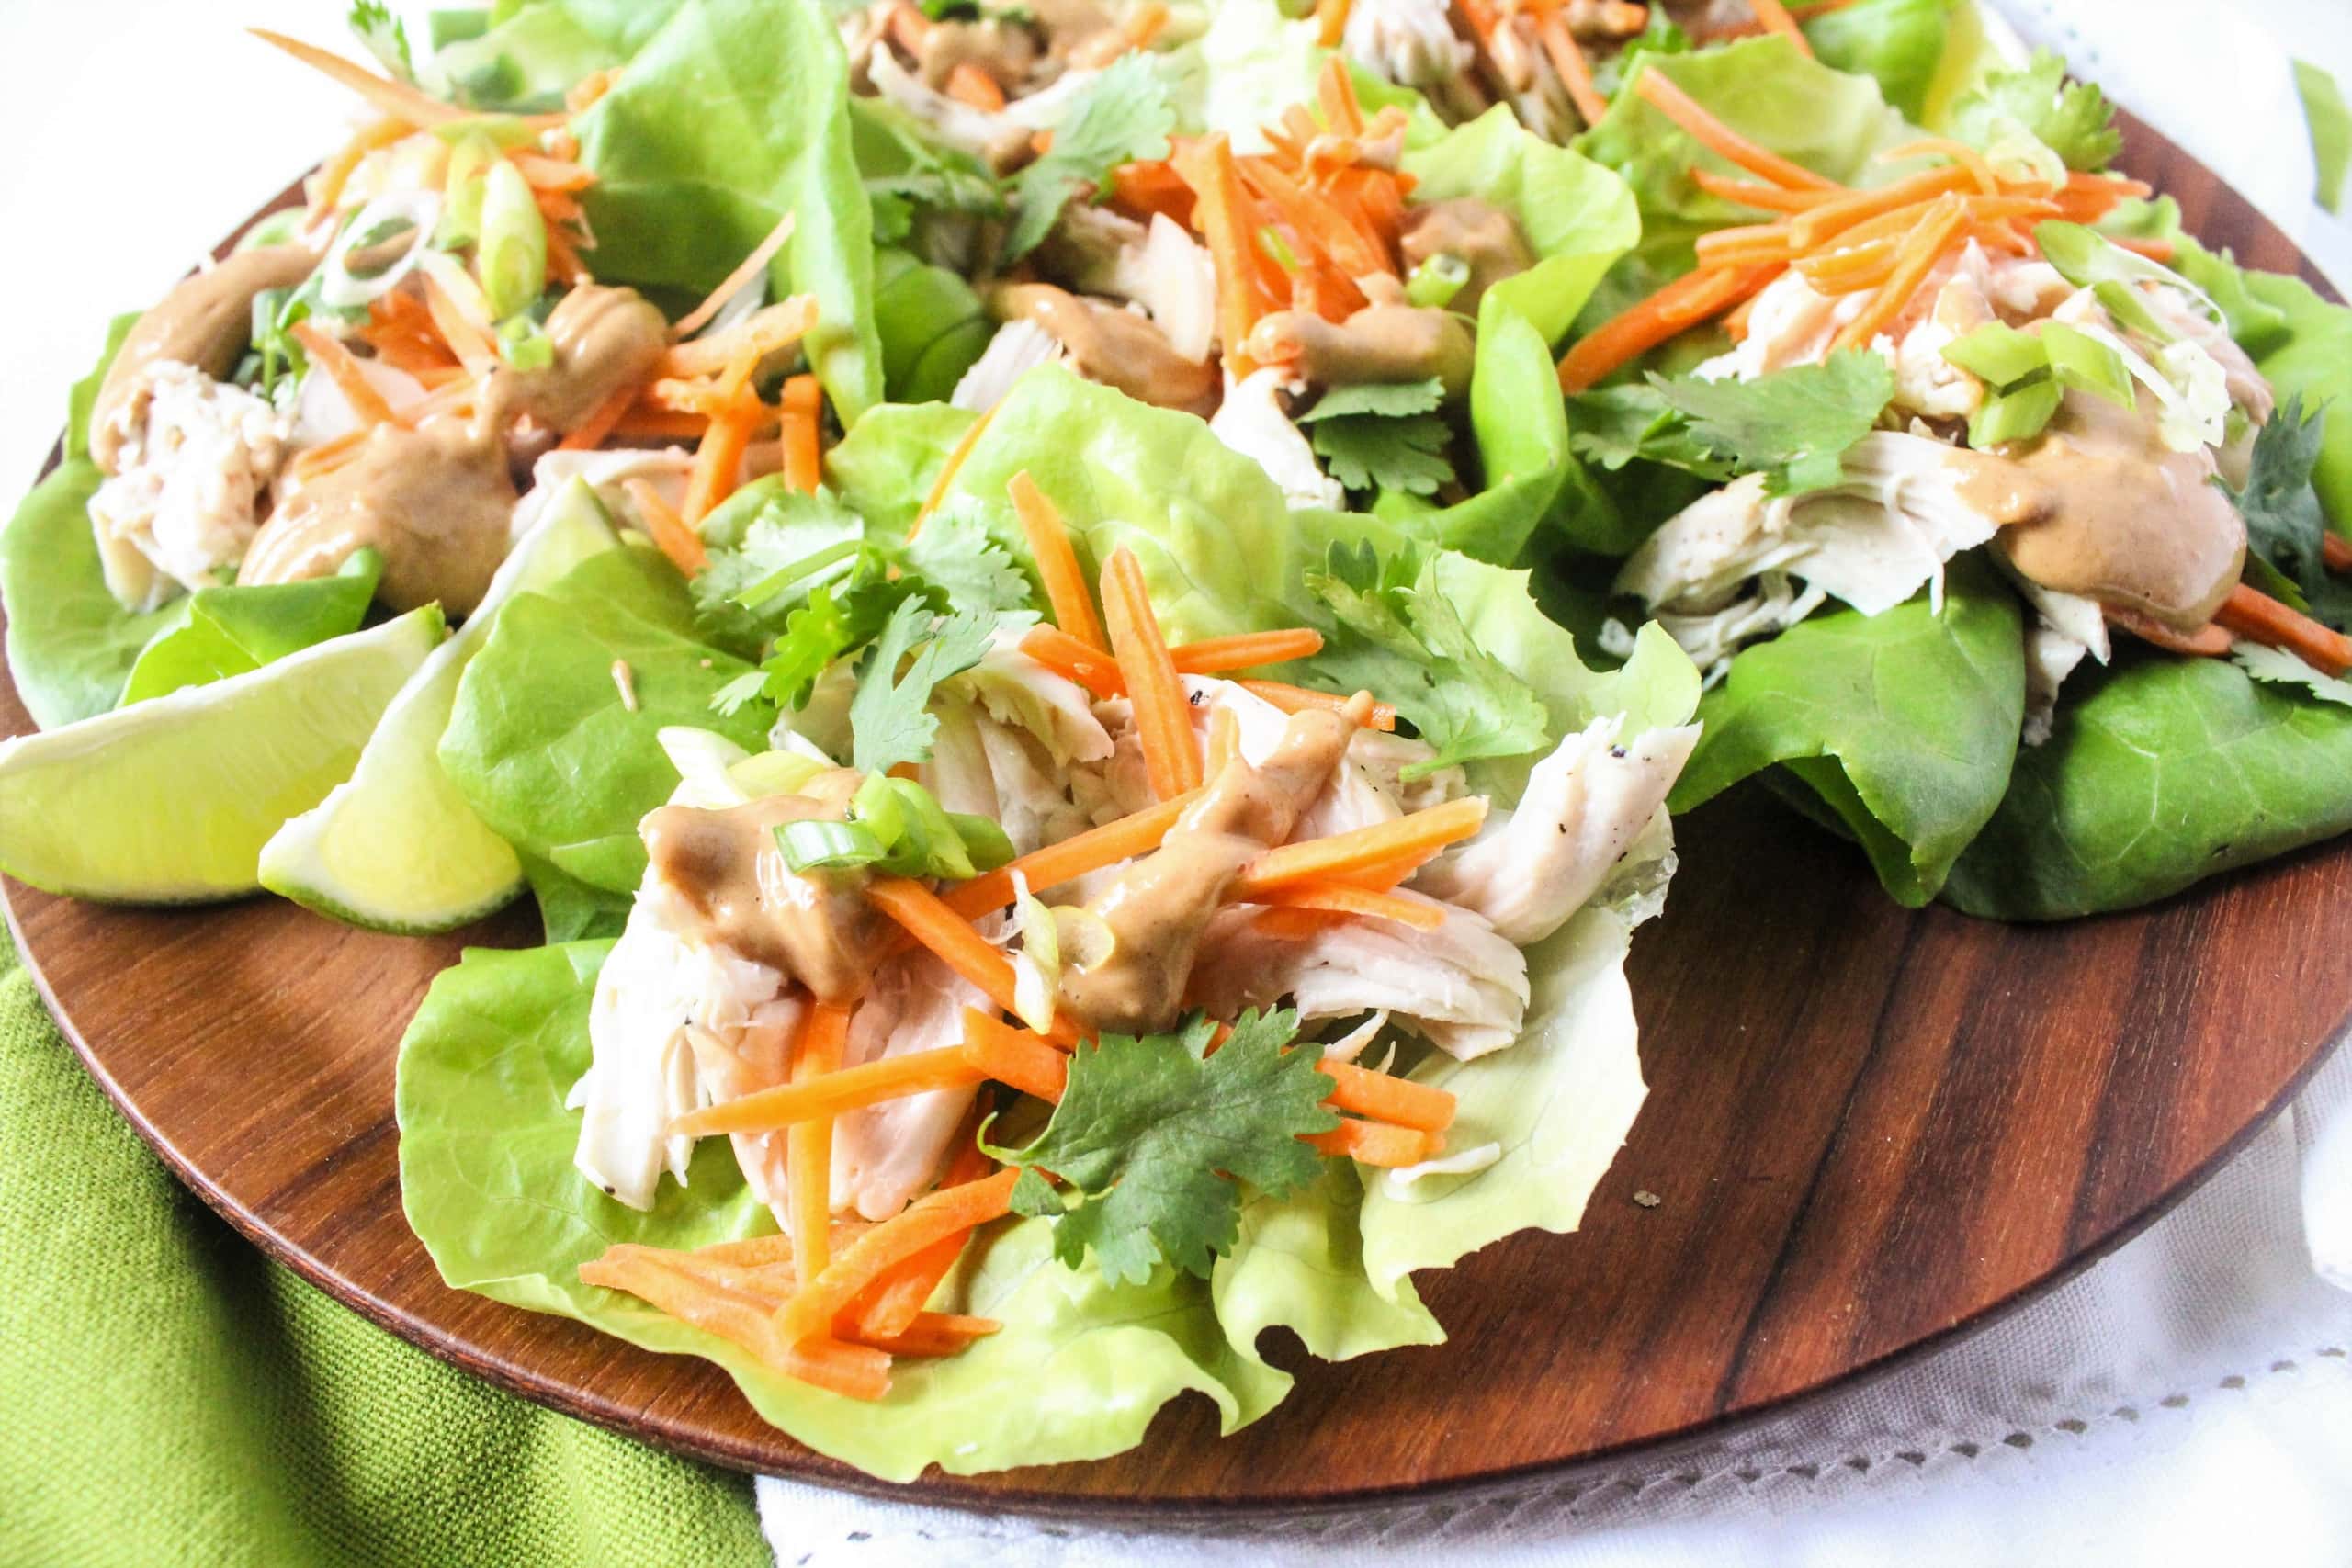 shredded chicken lettuce wraps recipe with lime